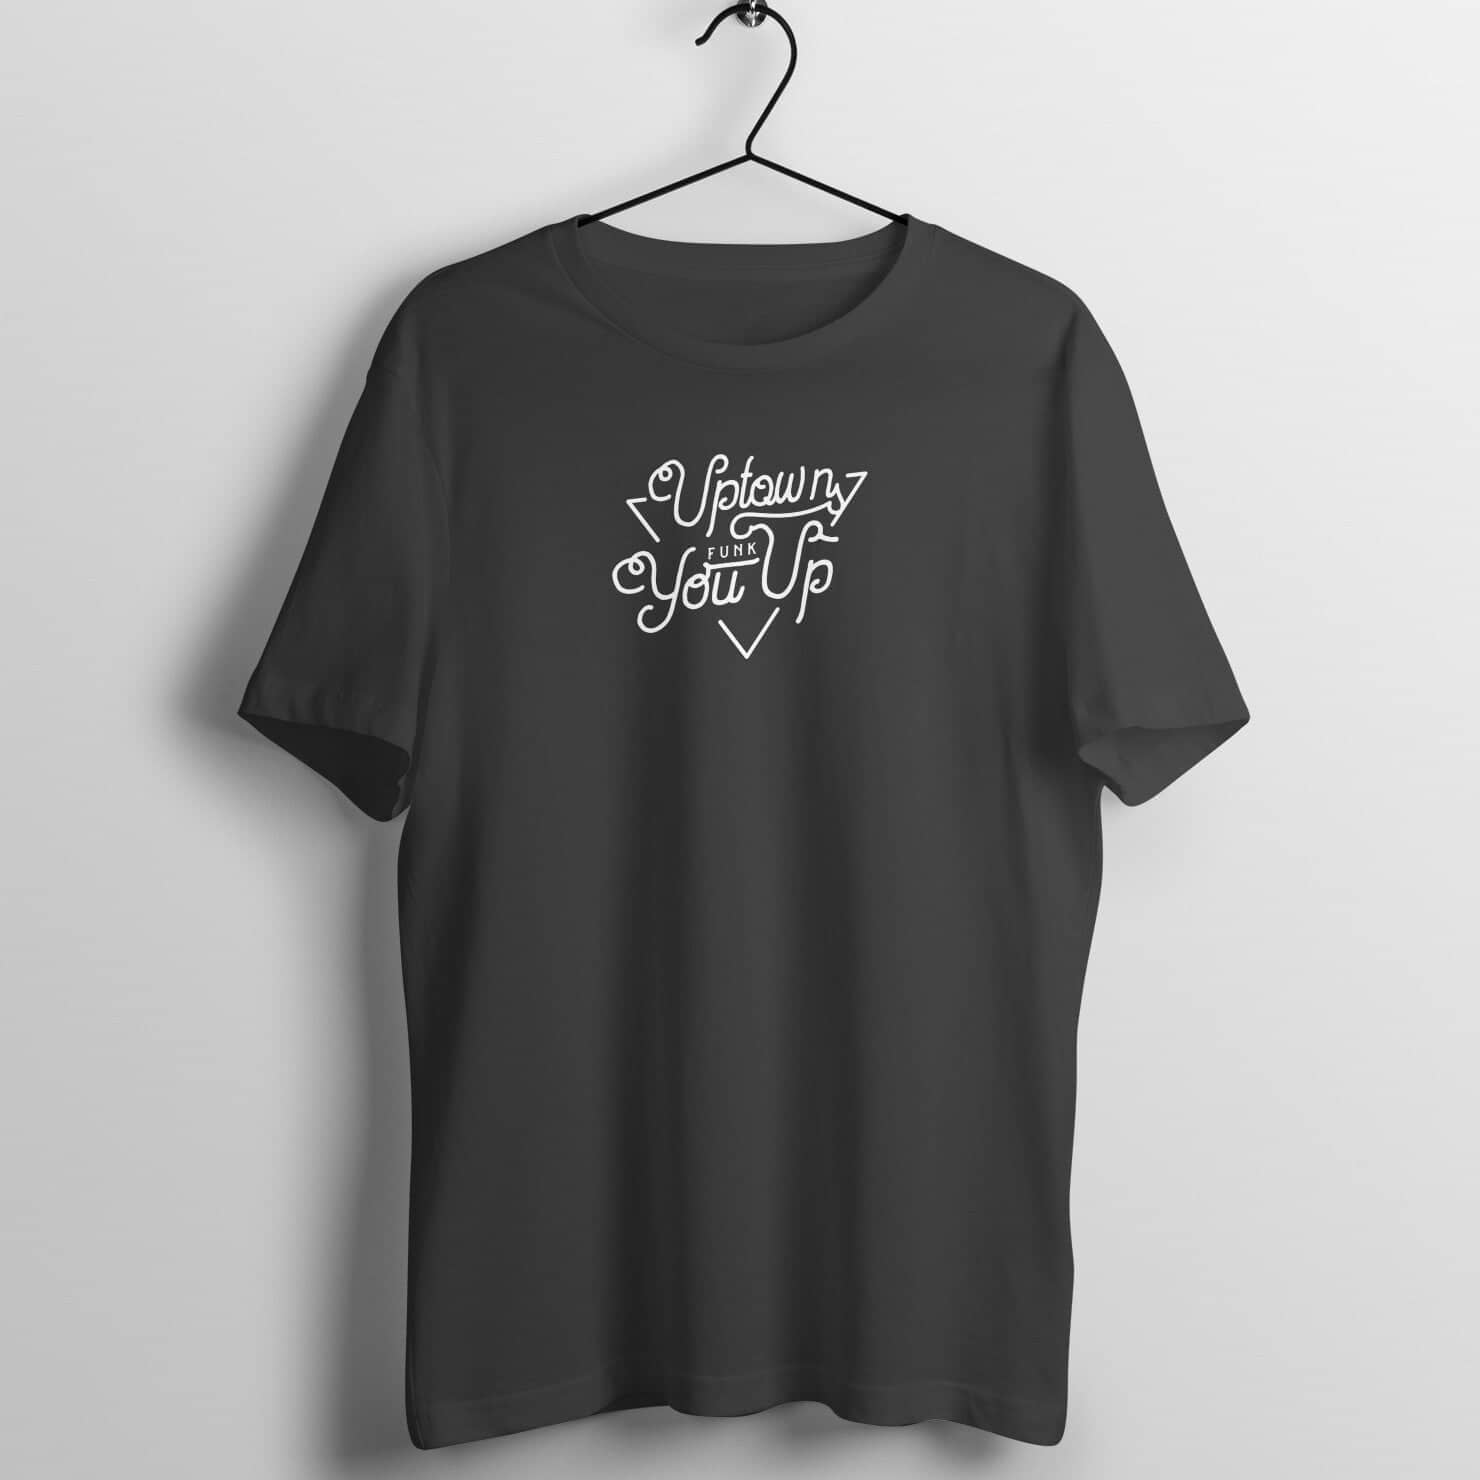 Uptown Funk You Up Exclusive Black T Shirt for Men and Women freeshipping - Catch My Drift India